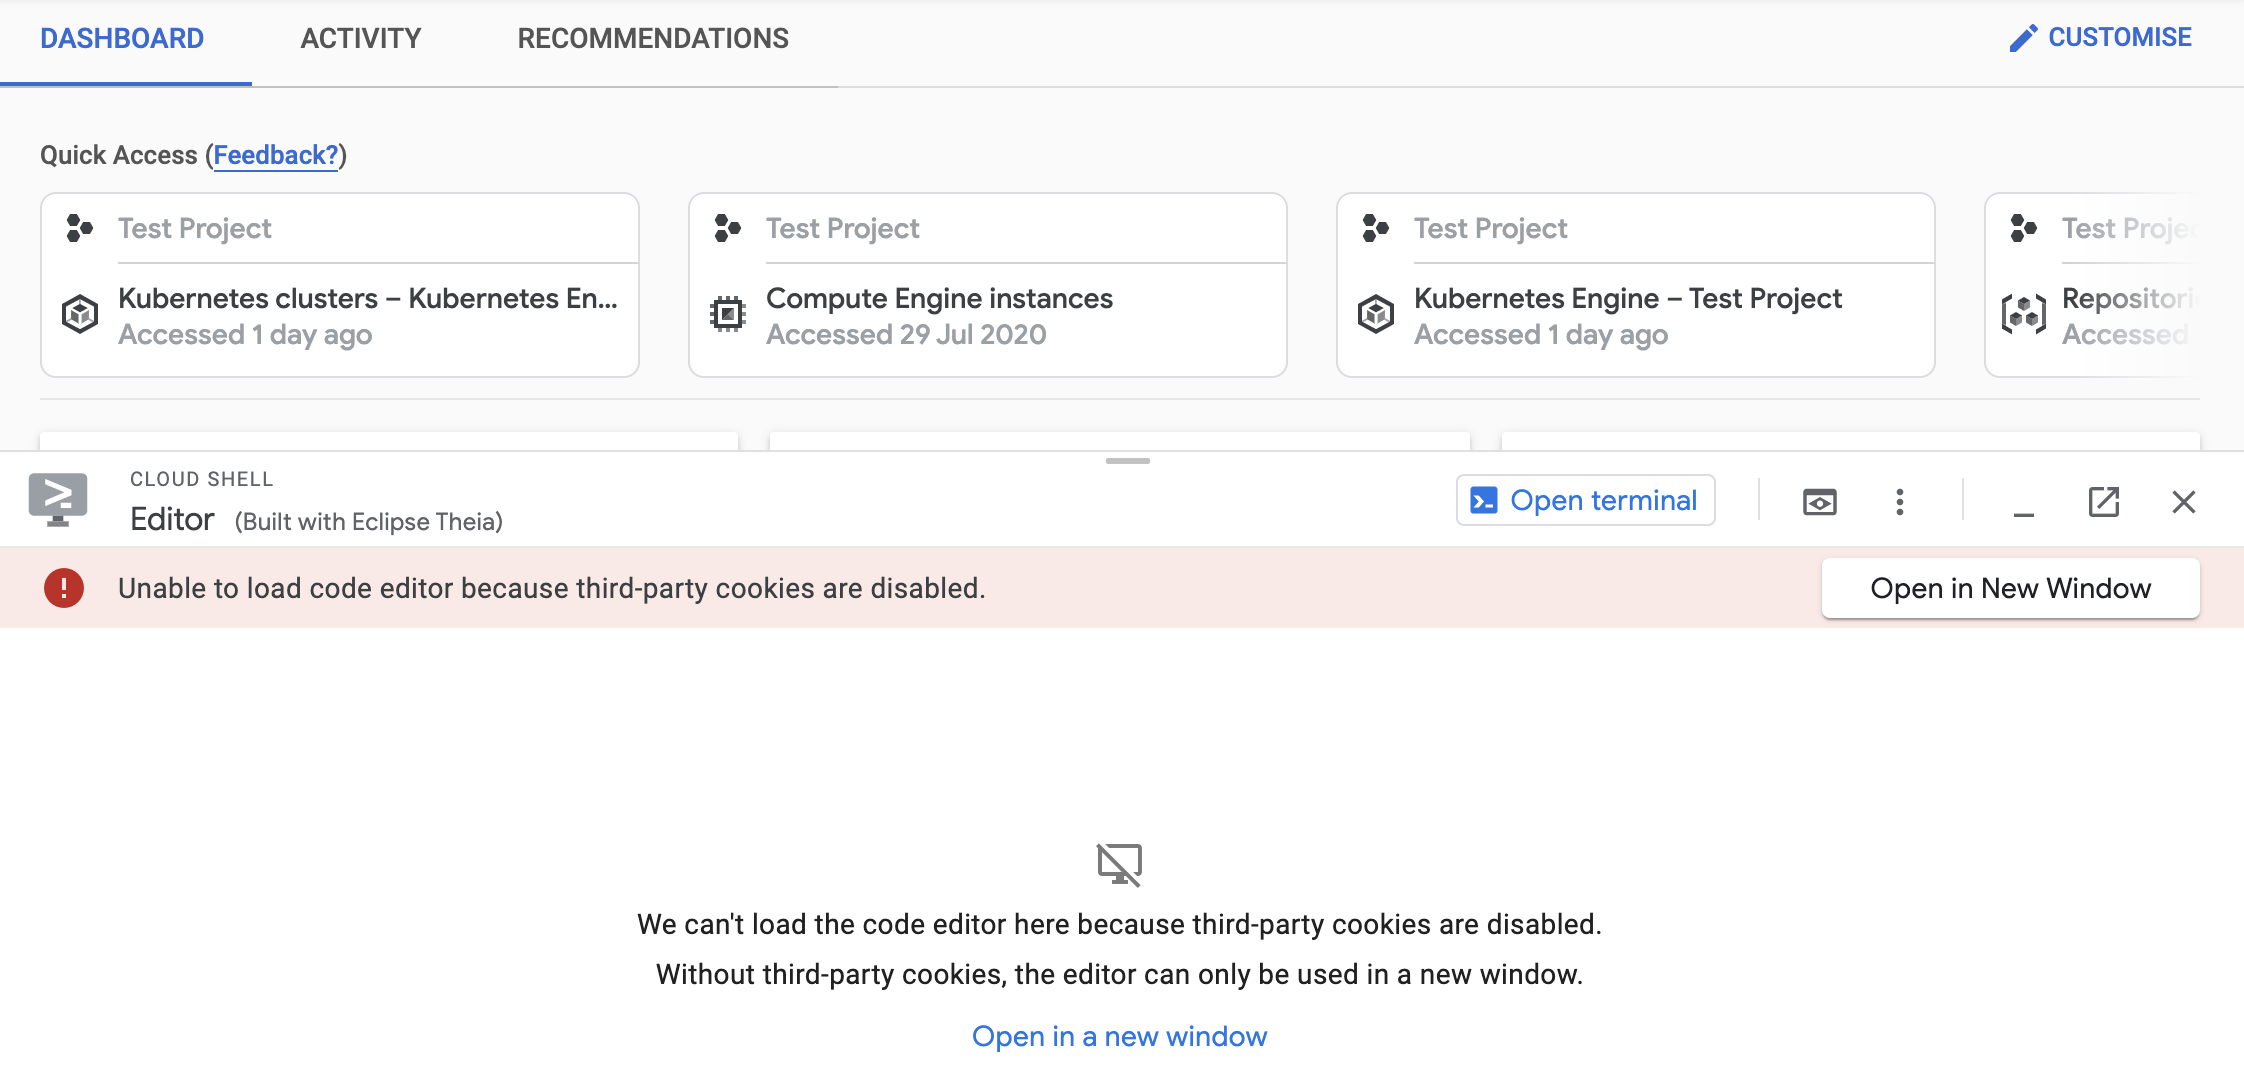 Editor panel explaining that the code editor could not be loaded because of third-party cookie blocking, with link to Open the editor in a new window